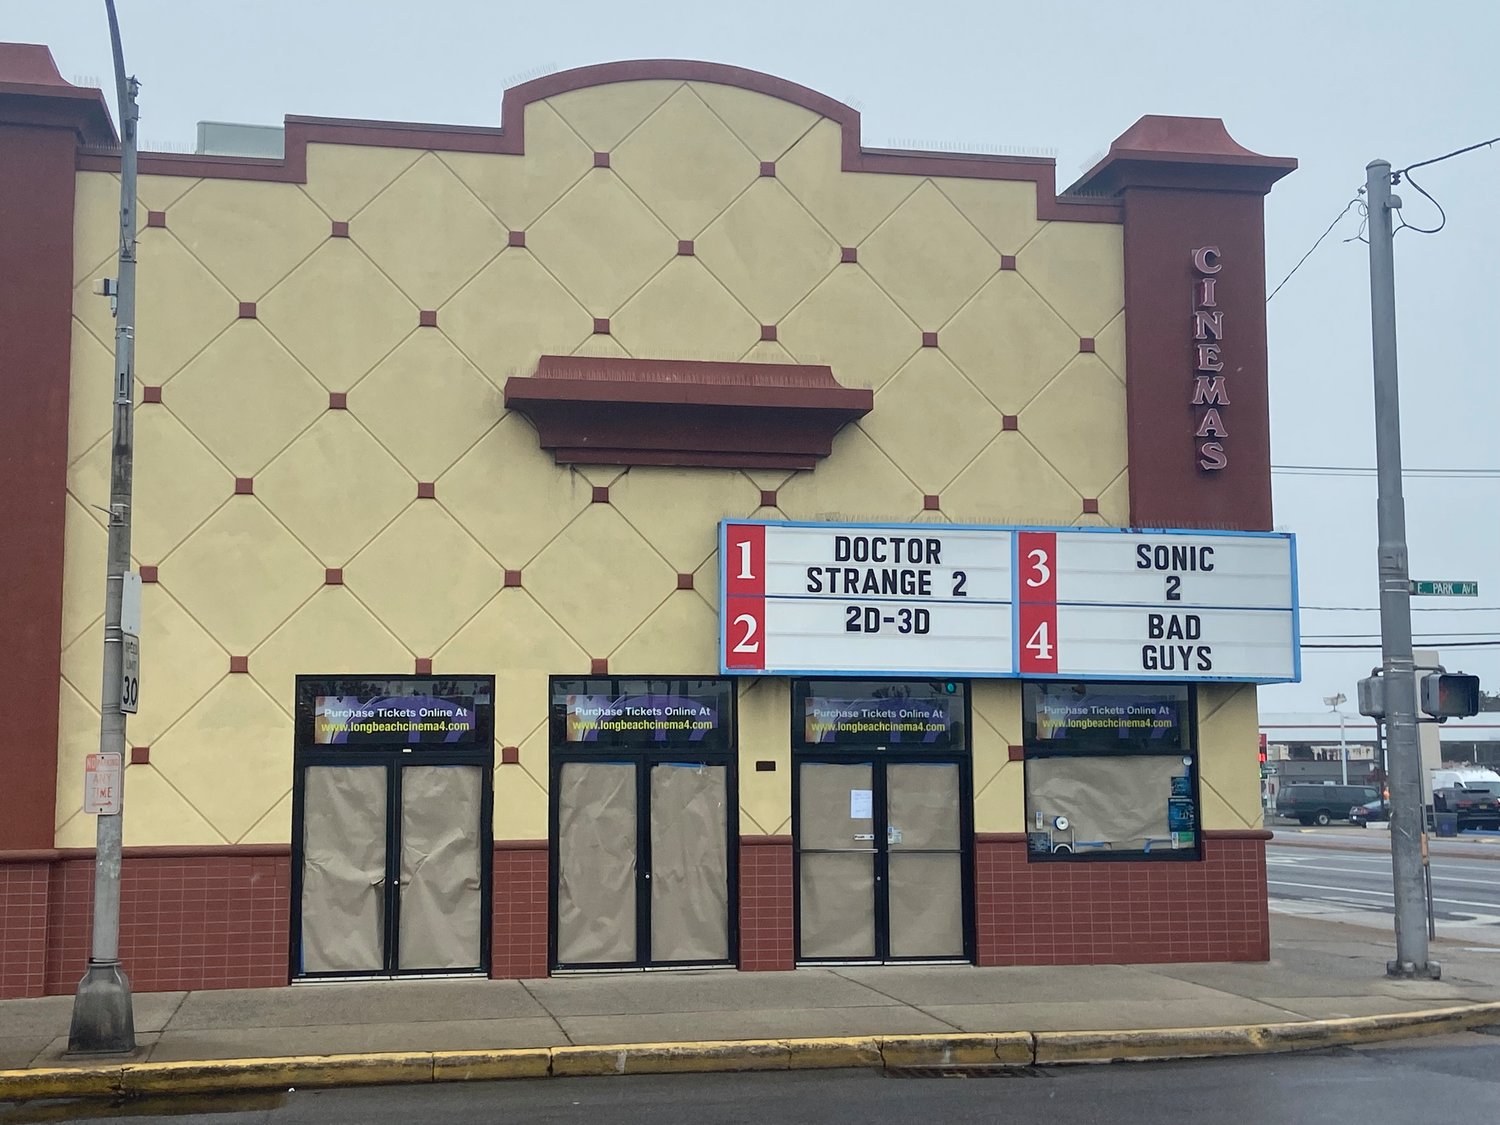 Long Beach cinema 4 now sports an updated marquee showing movies playing inside for the first time in two years.